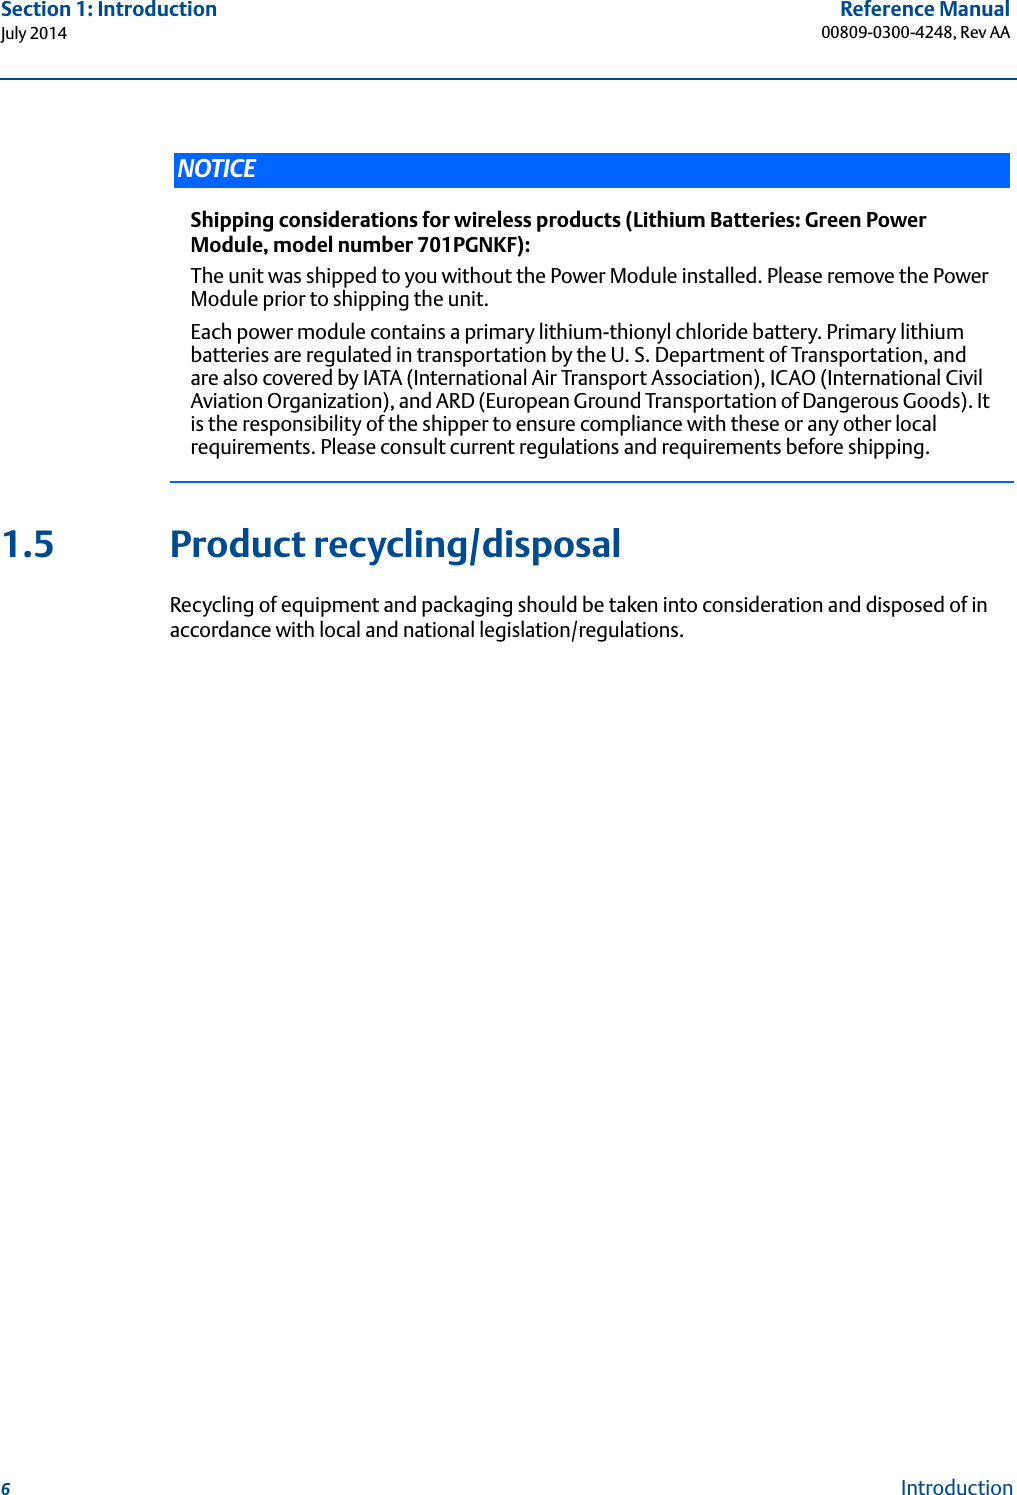 6Reference Manual00809-0300-4248, Rev AASection 1: IntroductionJuly 2014Introduction1.5 Product recycling/disposalRecycling of equipment and packaging should be taken into consideration and disposed of in accordance with local and national legislation/regulations.NOTICEShipping considerations for wireless products (Lithium Batteries: Green Power Module, model number 701PGNKF):The unit was shipped to you without the Power Module installed. Please remove the Power Module prior to shipping the unit.Each power module contains a primary lithium-thionyl chloride battery. Primary lithium batteries are regulated in transportation by the U. S. Department of Transportation, and are also covered by IATA (International Air Transport Association), ICAO (International Civil Aviation Organization), and ARD (European Ground Transportation of Dangerous Goods). It is the responsibility of the shipper to ensure compliance with these or any other local requirements. Please consult current regulations and requirements before shipping.